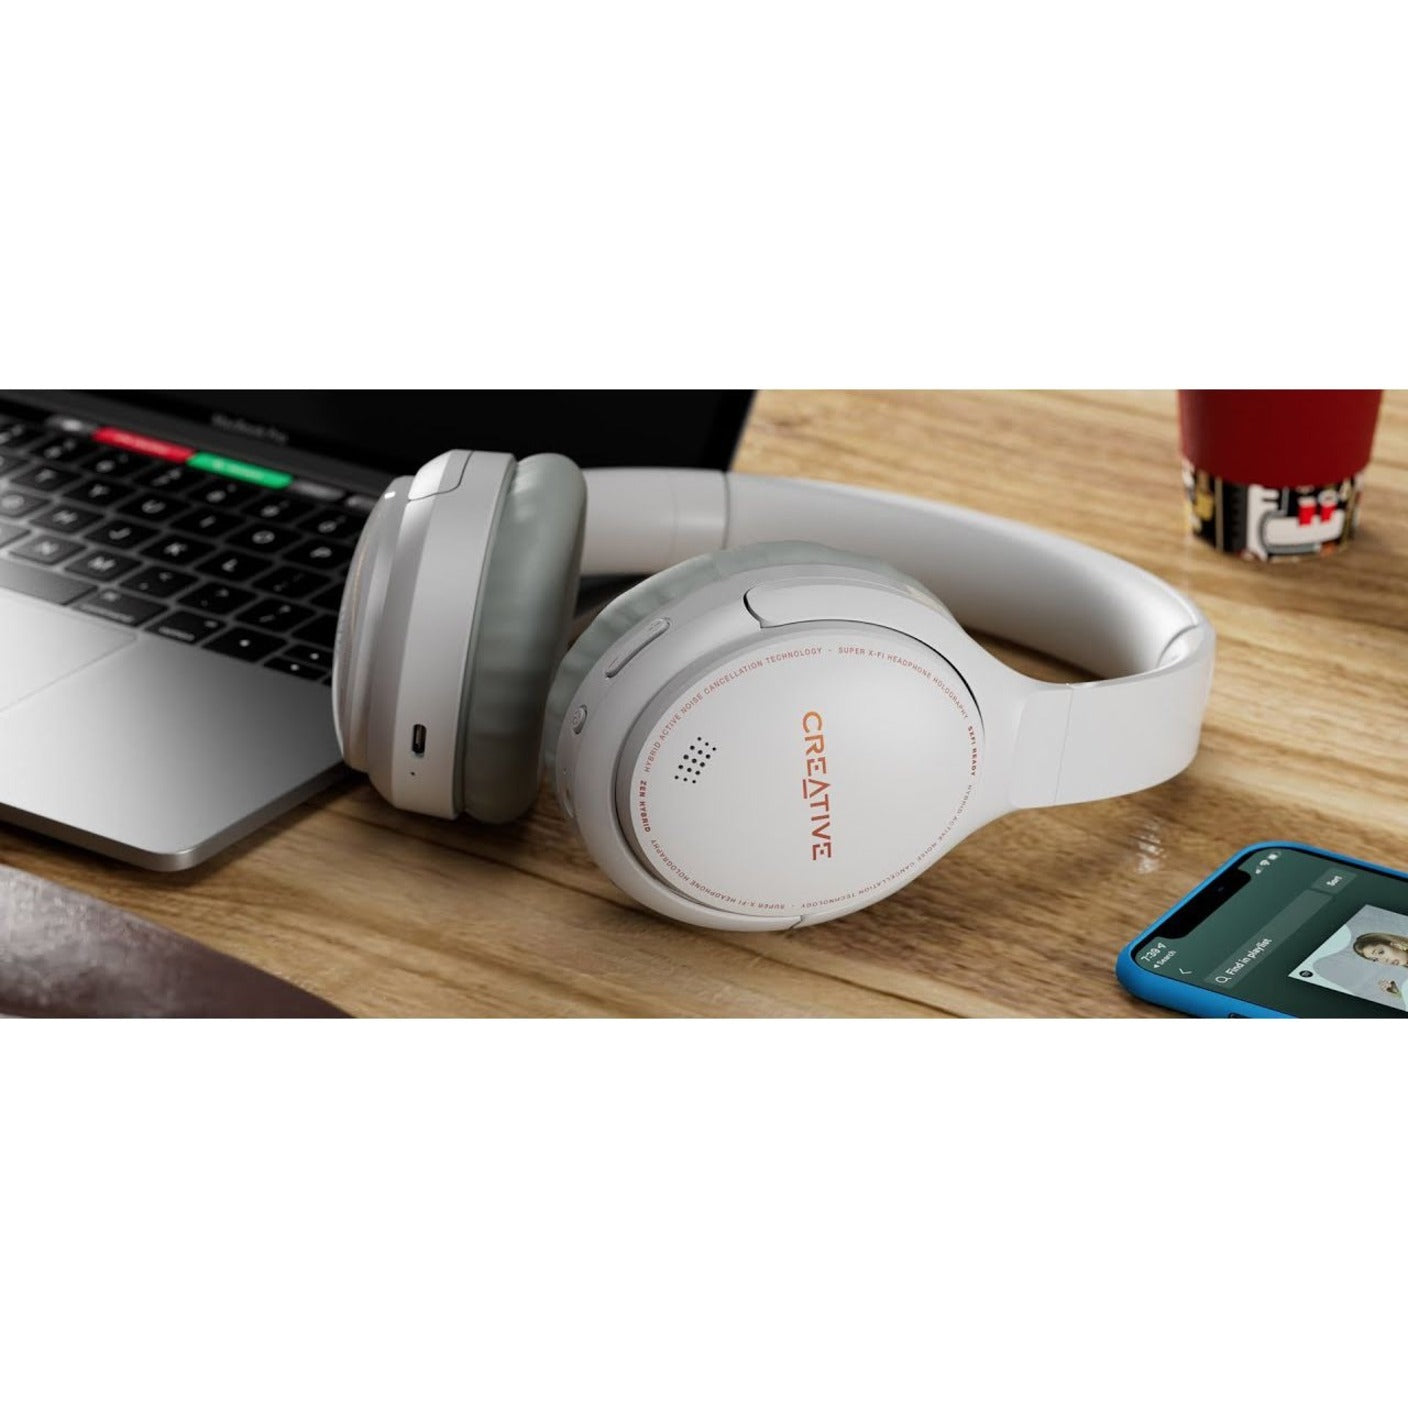 Creative 51EF1010AA000 Zen Hybrid Headset, Over-the-ear Bluetooth 5.0 Stereo Headphones with Noise Cancelling